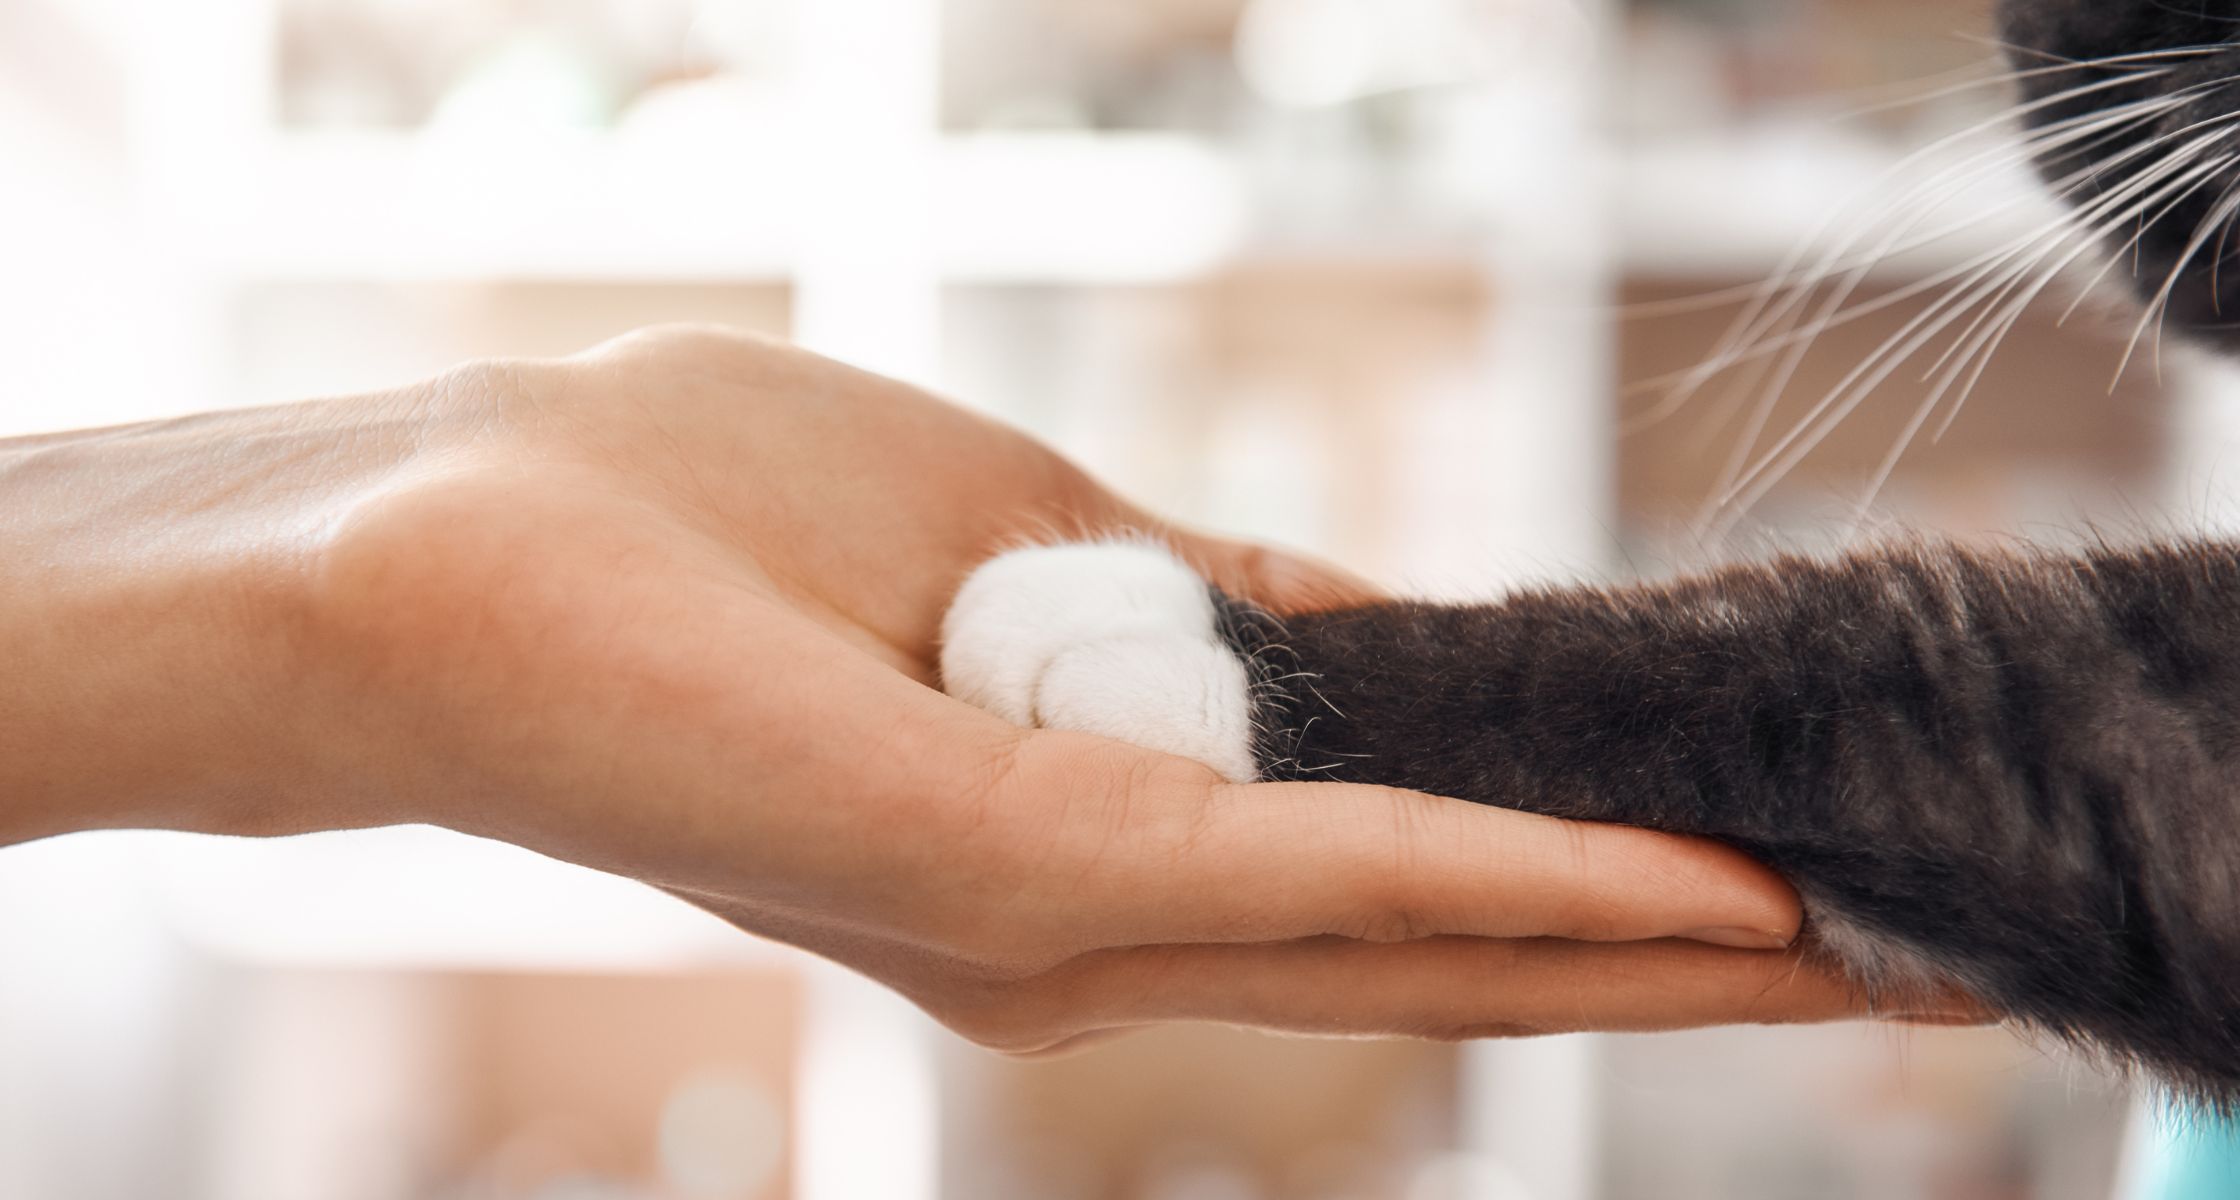 Human hand holding a cat paw